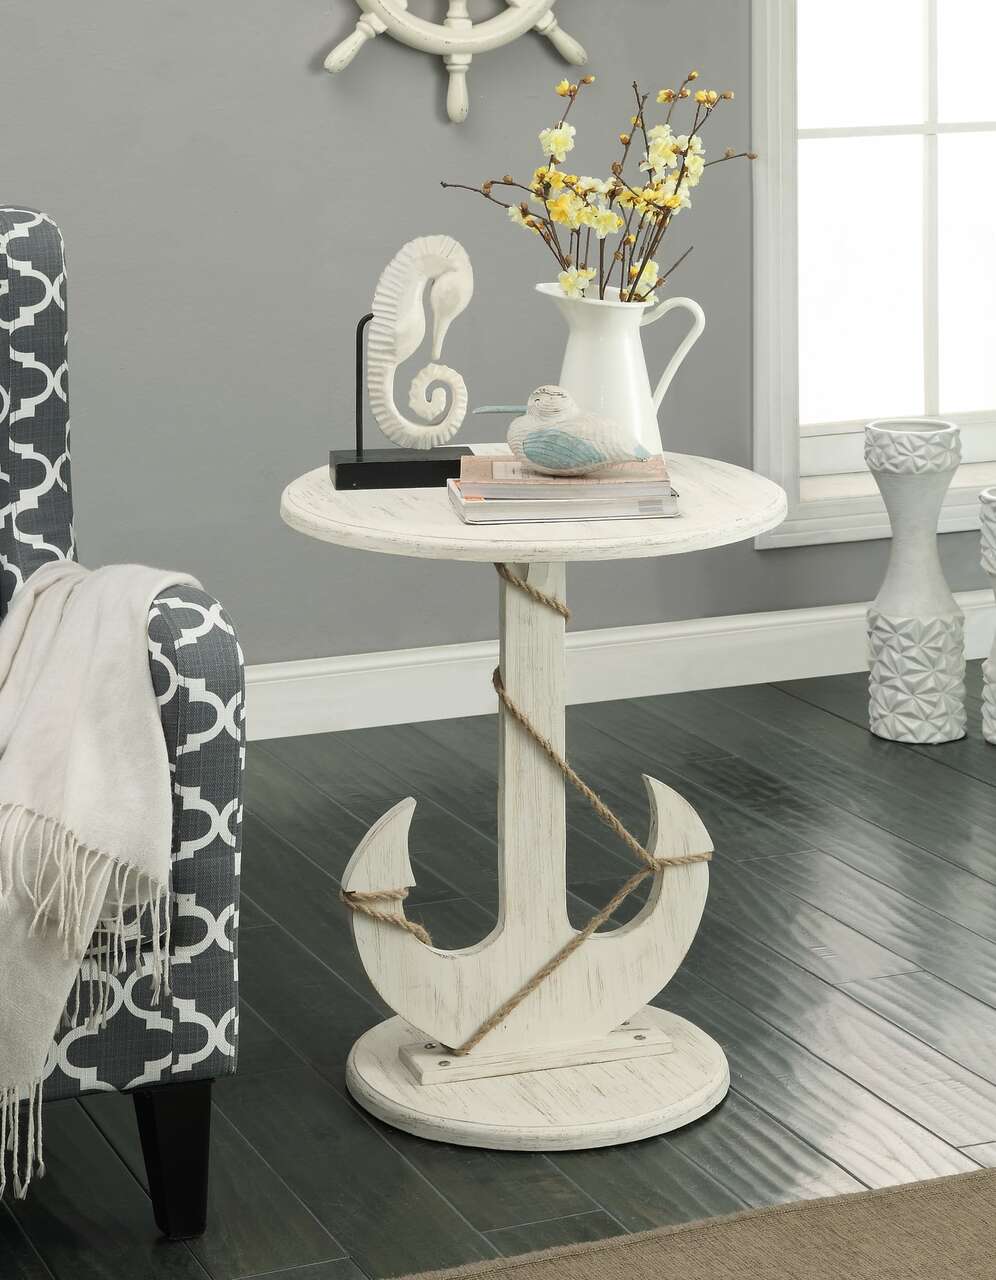  91749 Accent Table - FREE Shipping $210